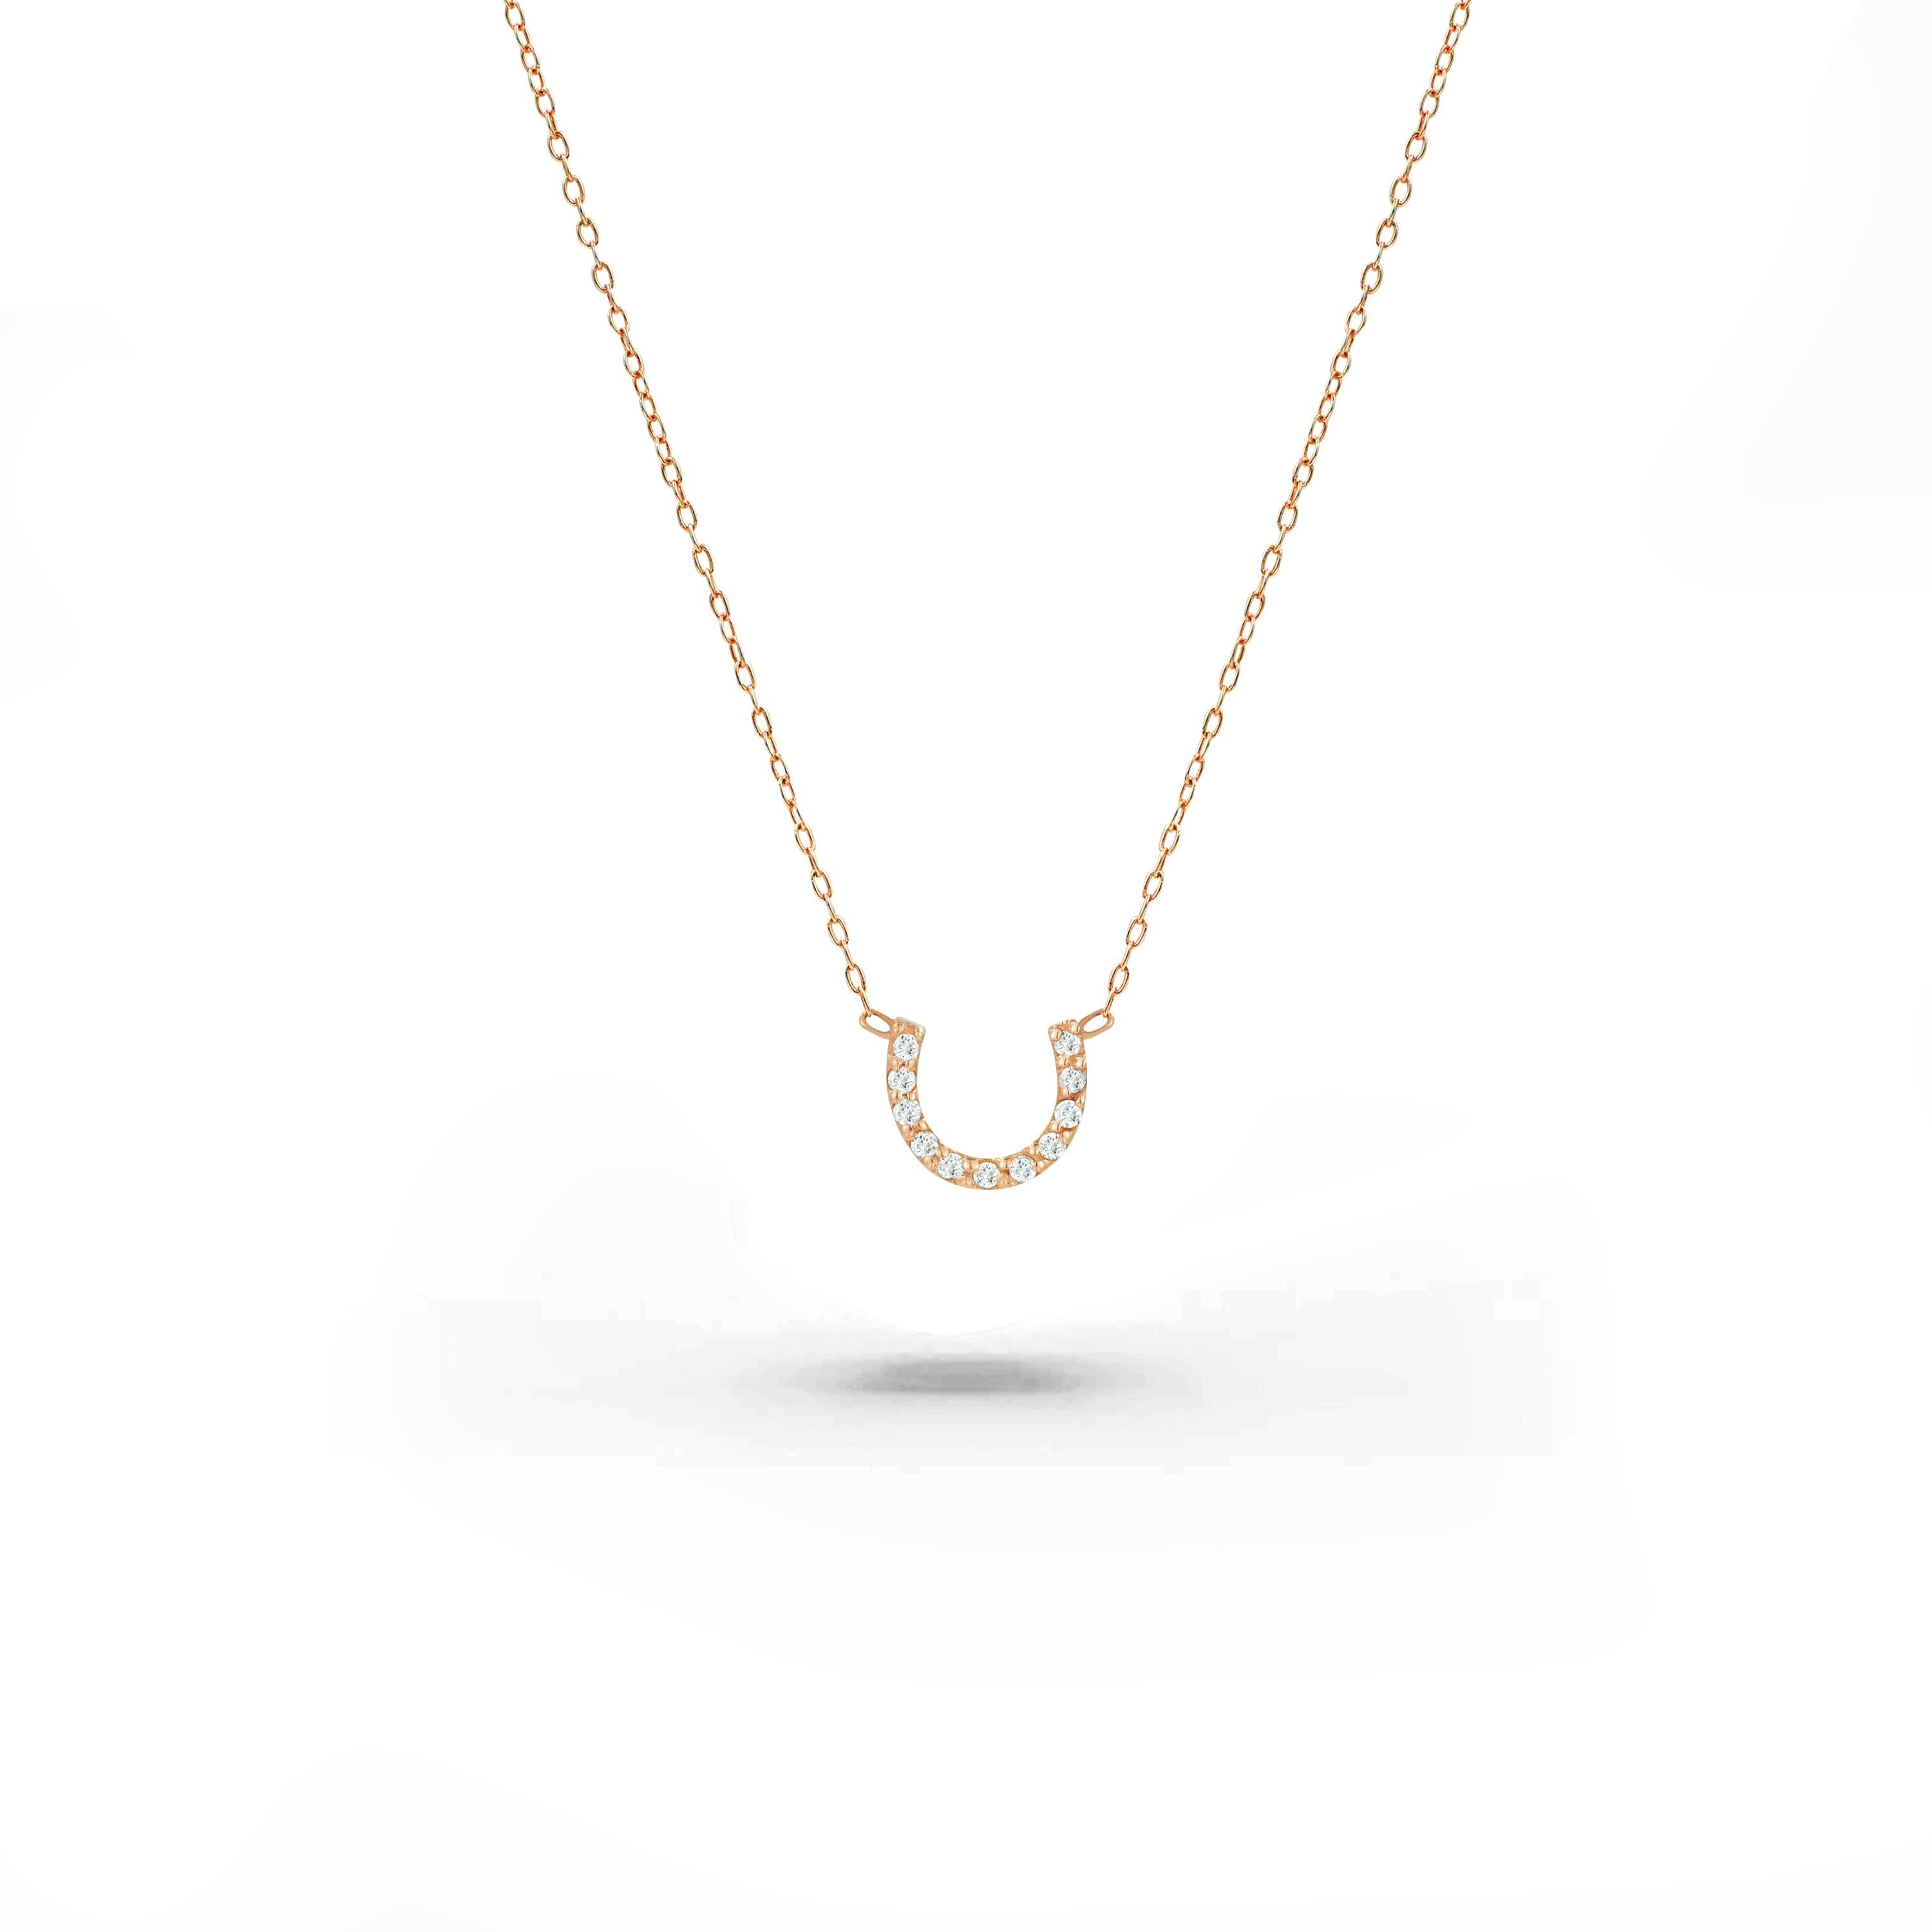 Dainty Horseshoe Diamond Necklace is made of 18k solid gold.
Available in three colors of gold, White gold / Rose Gold / Yellow Gold.

Lightweight and gorgeous natural genuine round cut diamond. Each diamond is hand selected by me to ensure quality